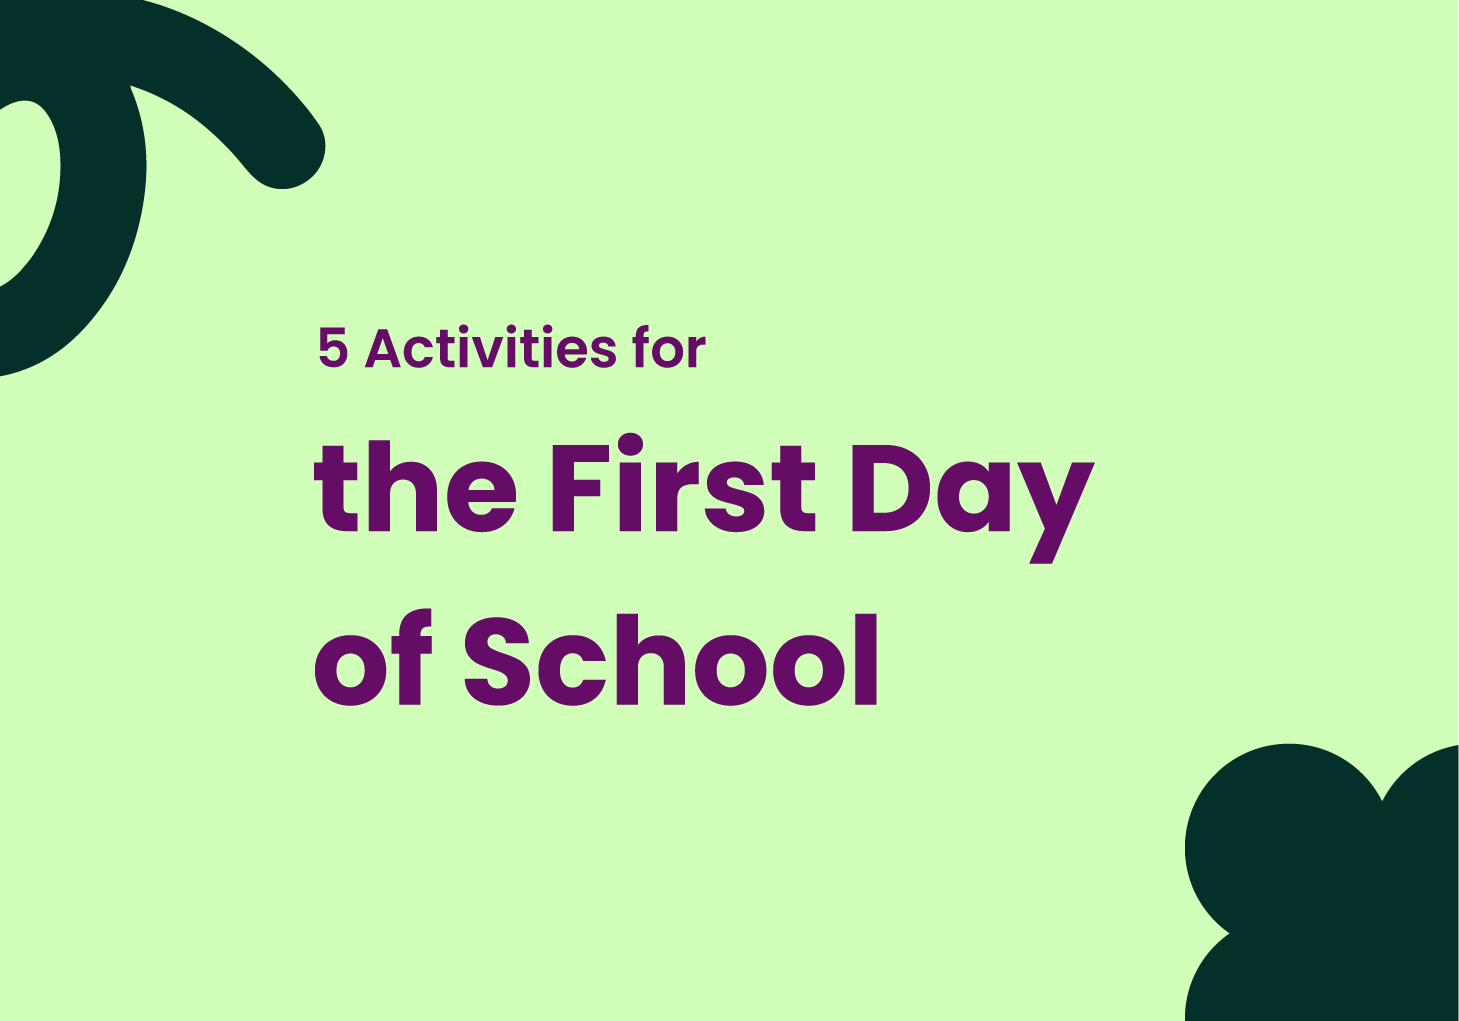 5 Activities for the First Day of School